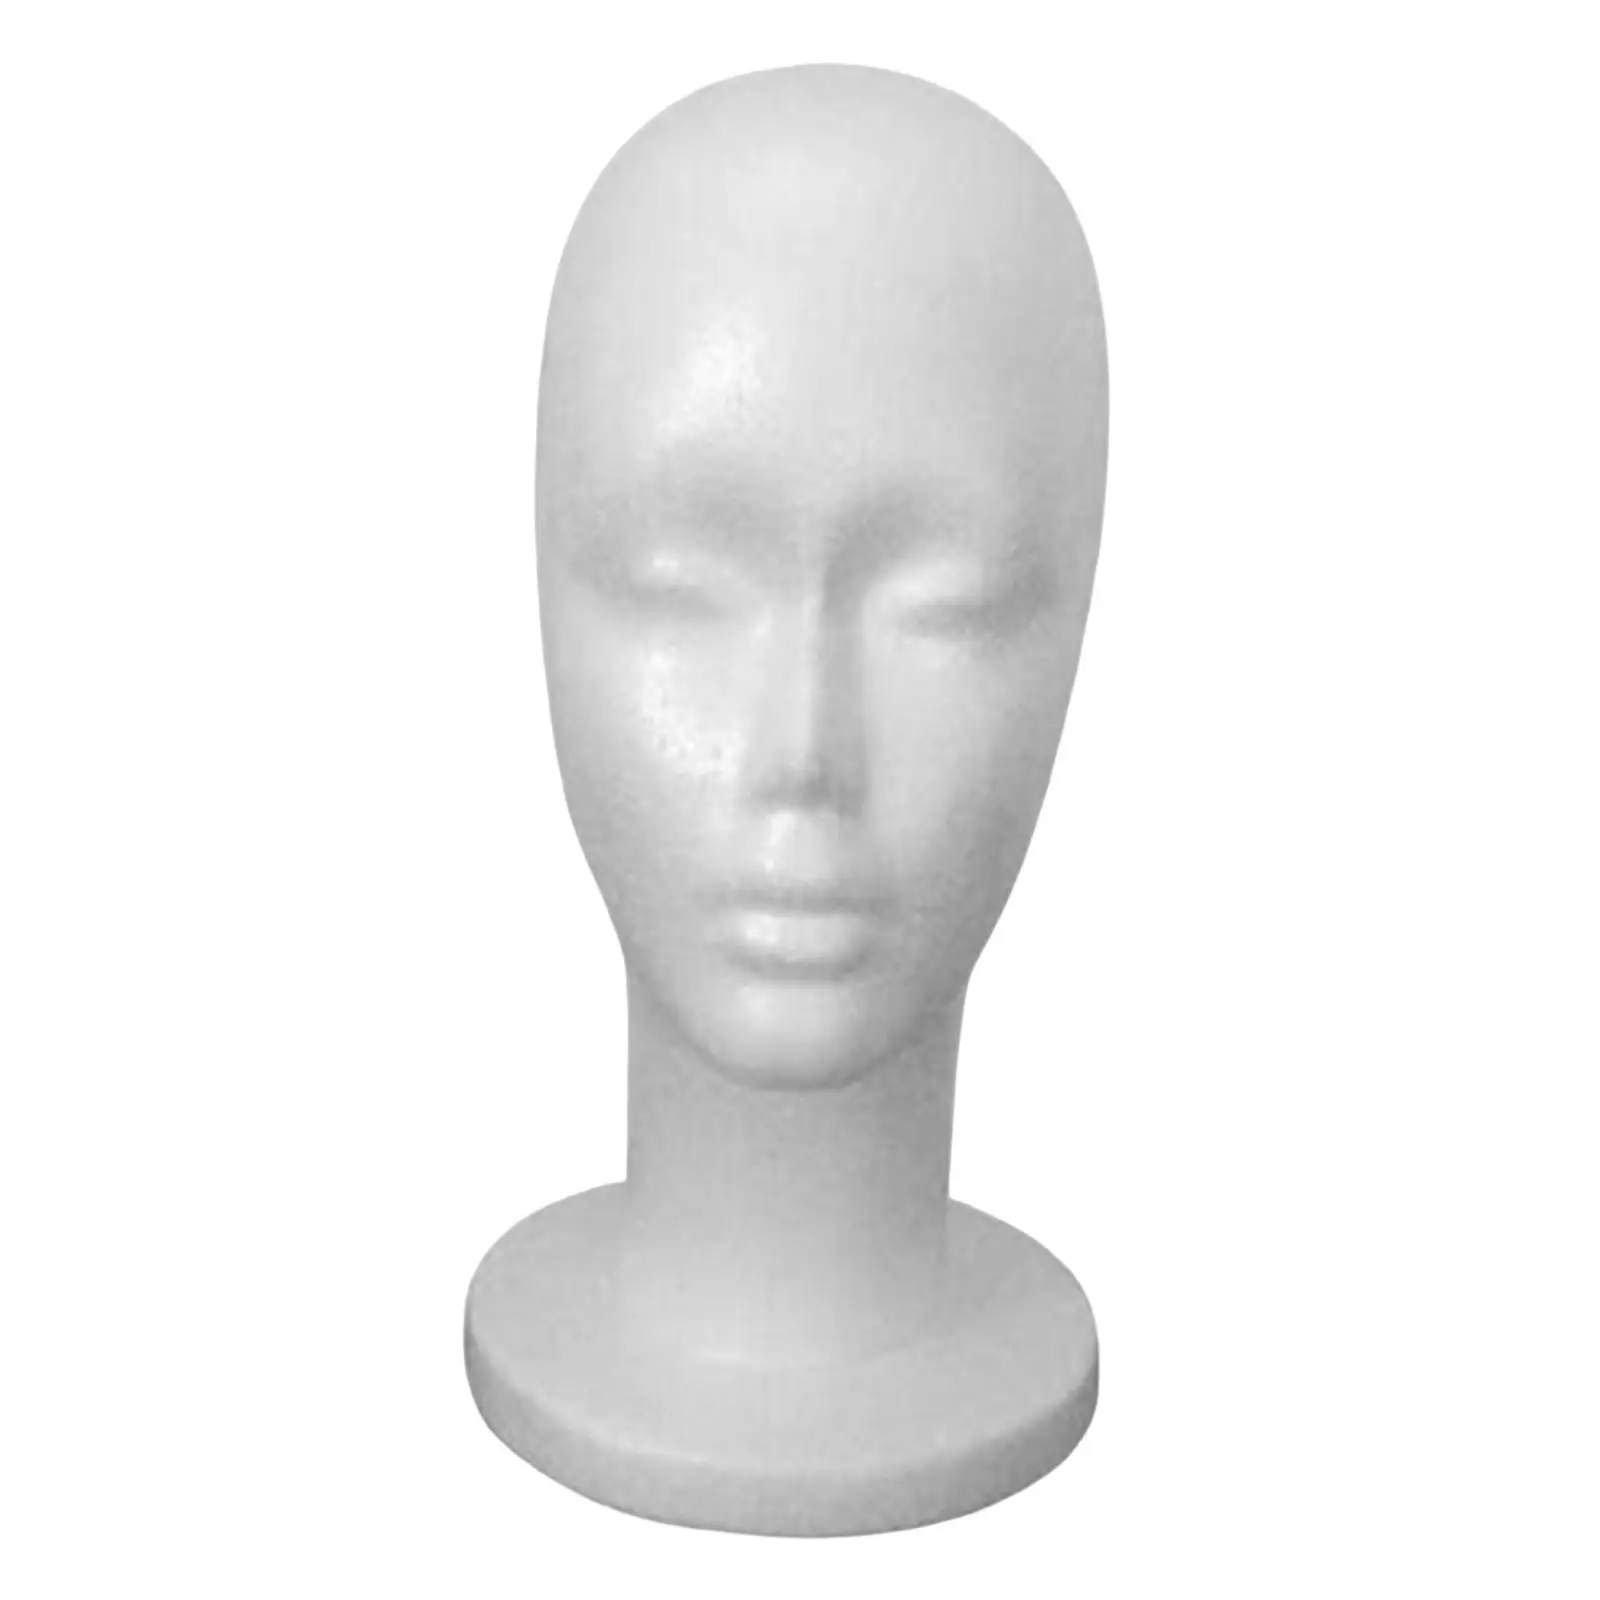 Female Foam Mannequin Head Model DIY Hat Glasses Holder White Versatile Uses for Professional or Personal Use 11.4 inch Tall